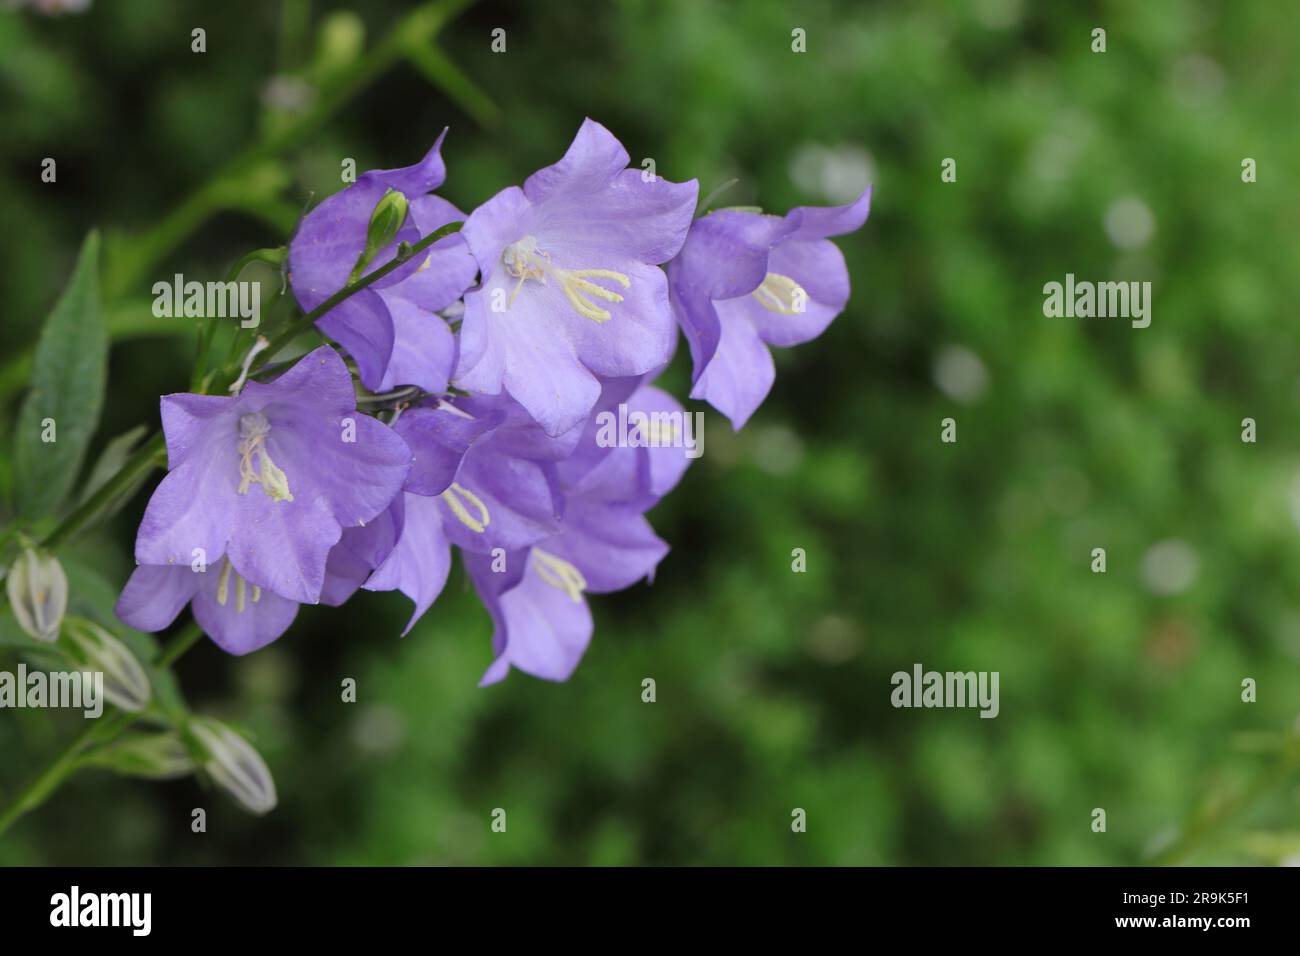 close-up of beautiful purple-blue Campanula persicifolia flowers against a green blurry background, copy space Stock Photo